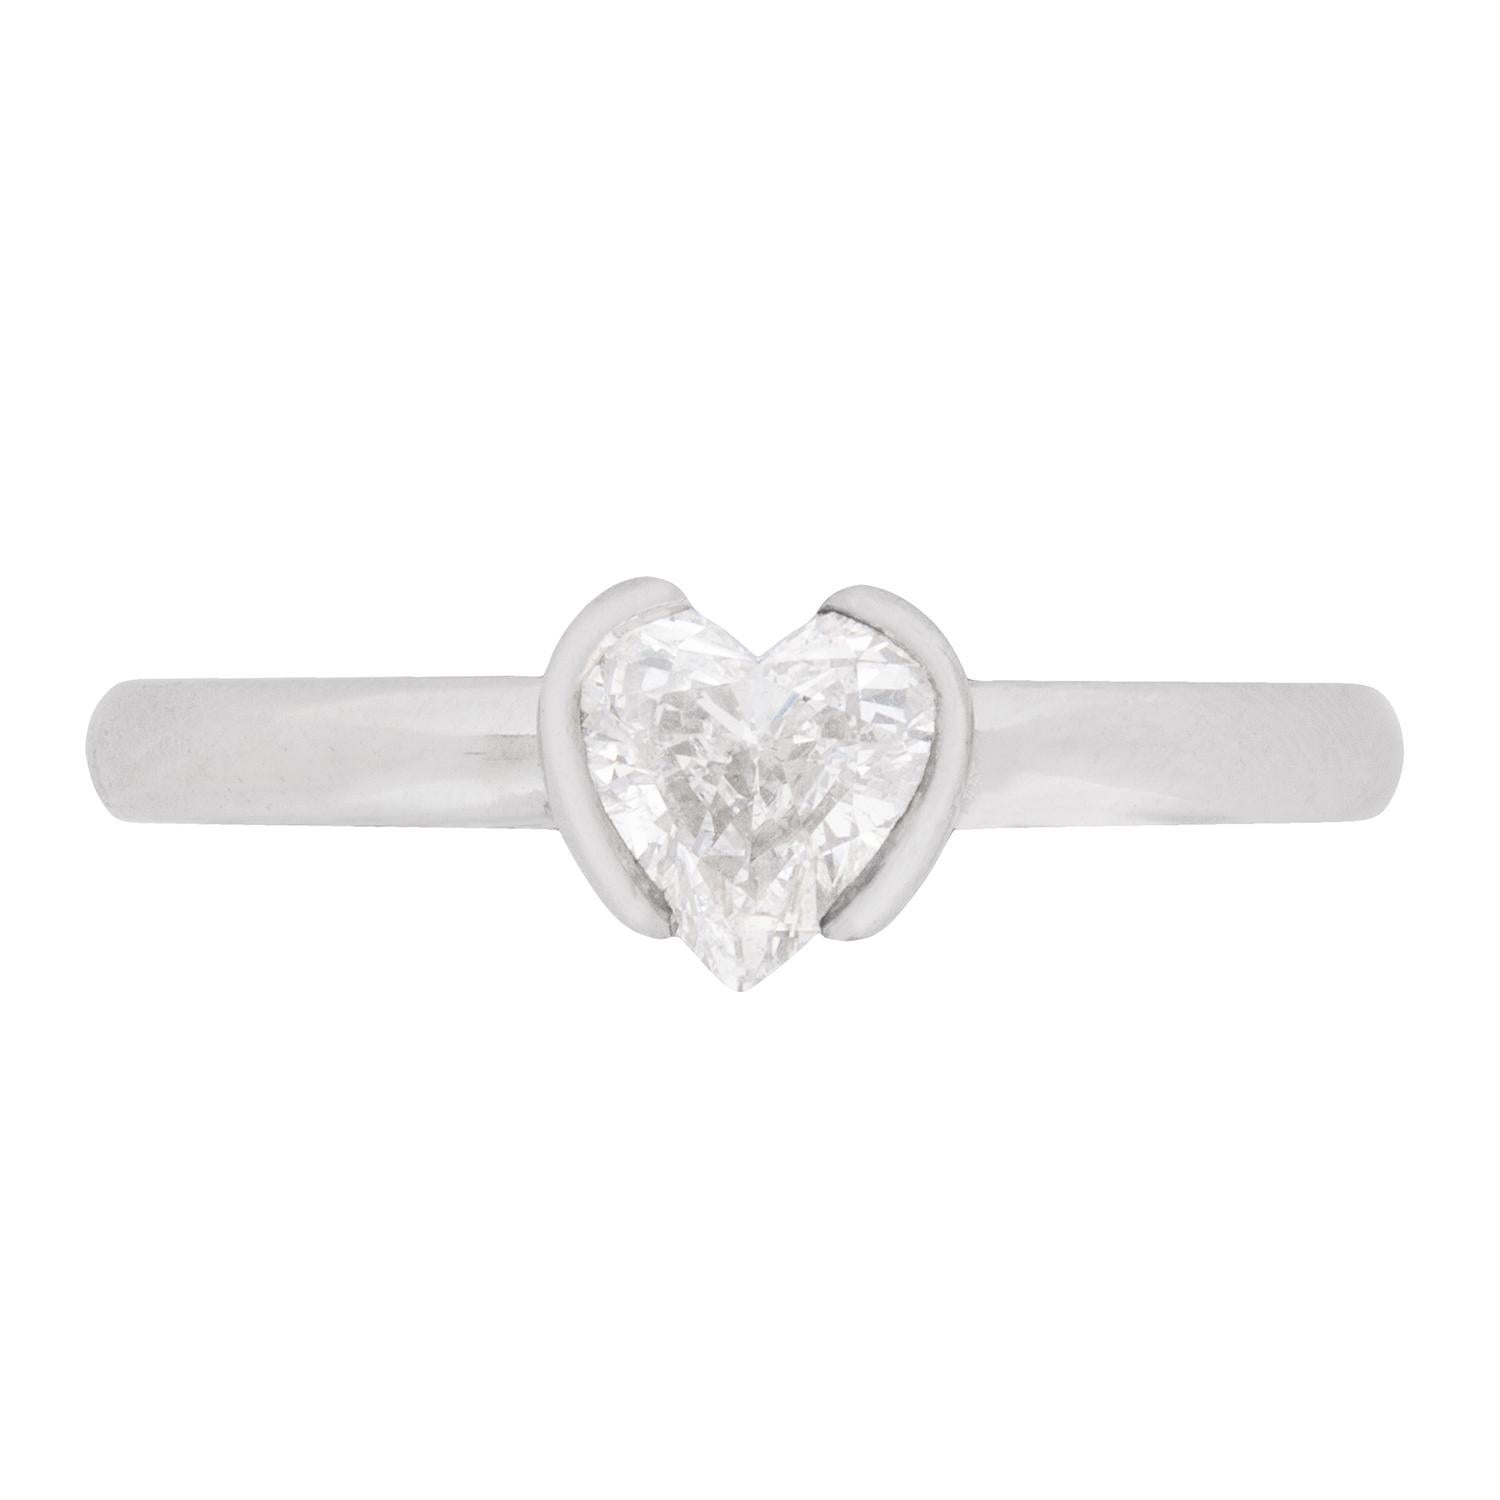 Theo Fennell 0.80 Carat Heart Shaped Diamond Solitaire